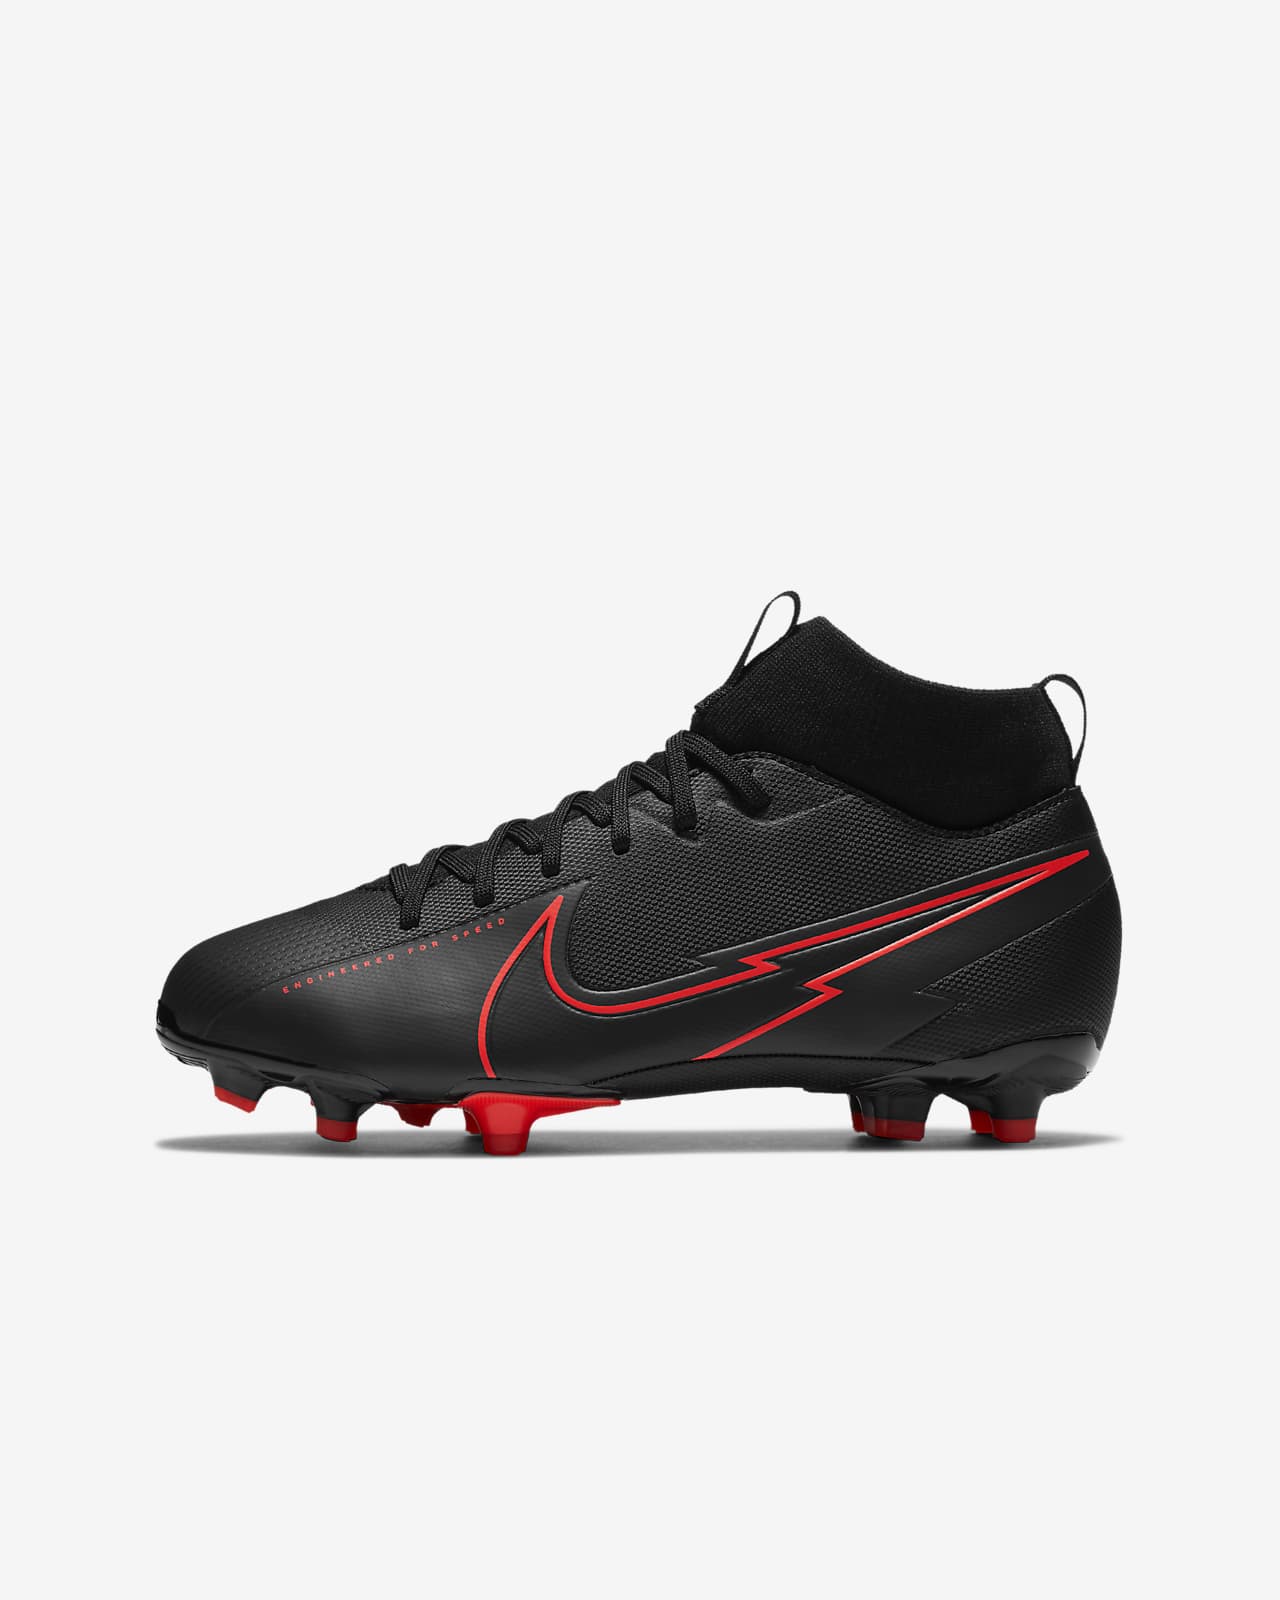 soccer shoes nike 2019